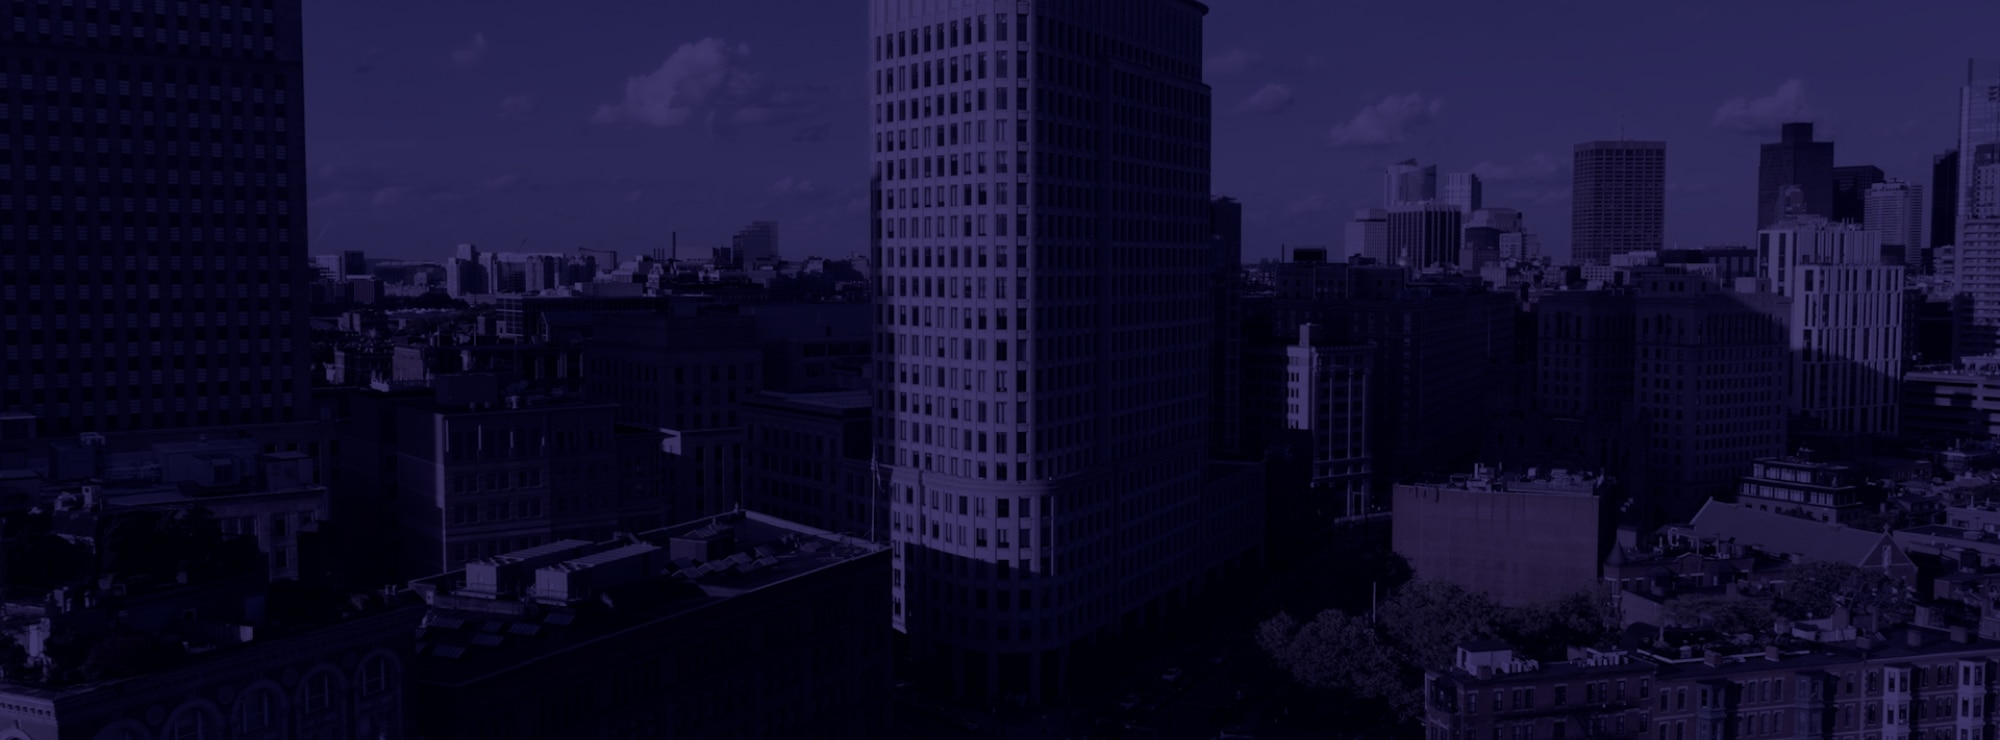 Image of Liberty Mutual Headquarters - with navy blue overlay